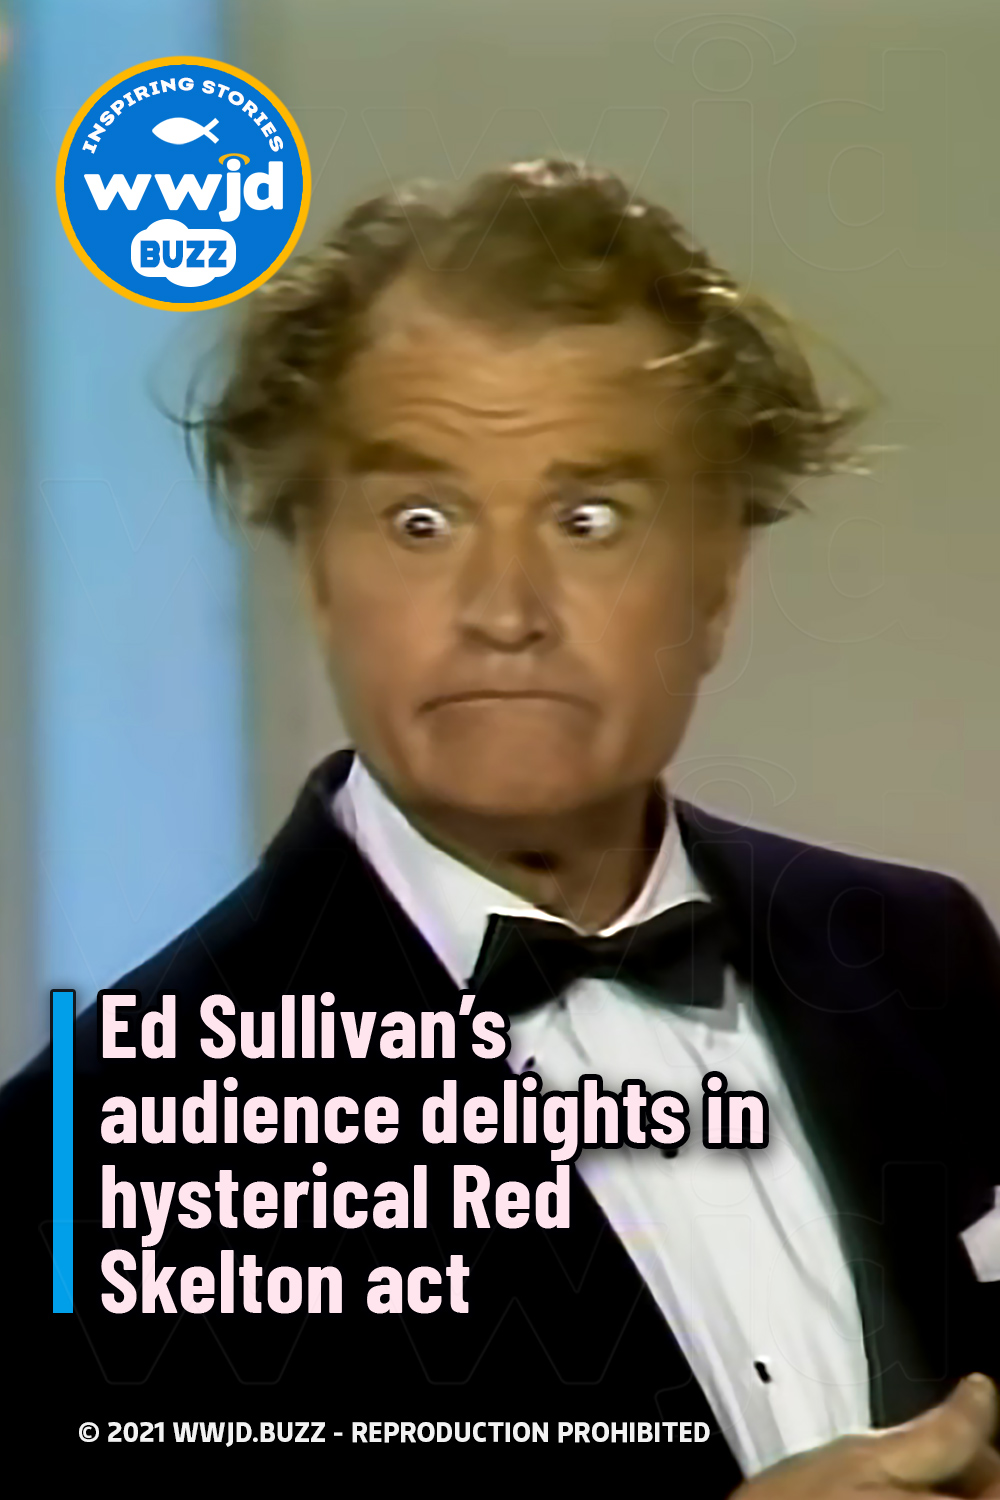 Ed Sullivan’s audience delights in hysterical Red Skelton act